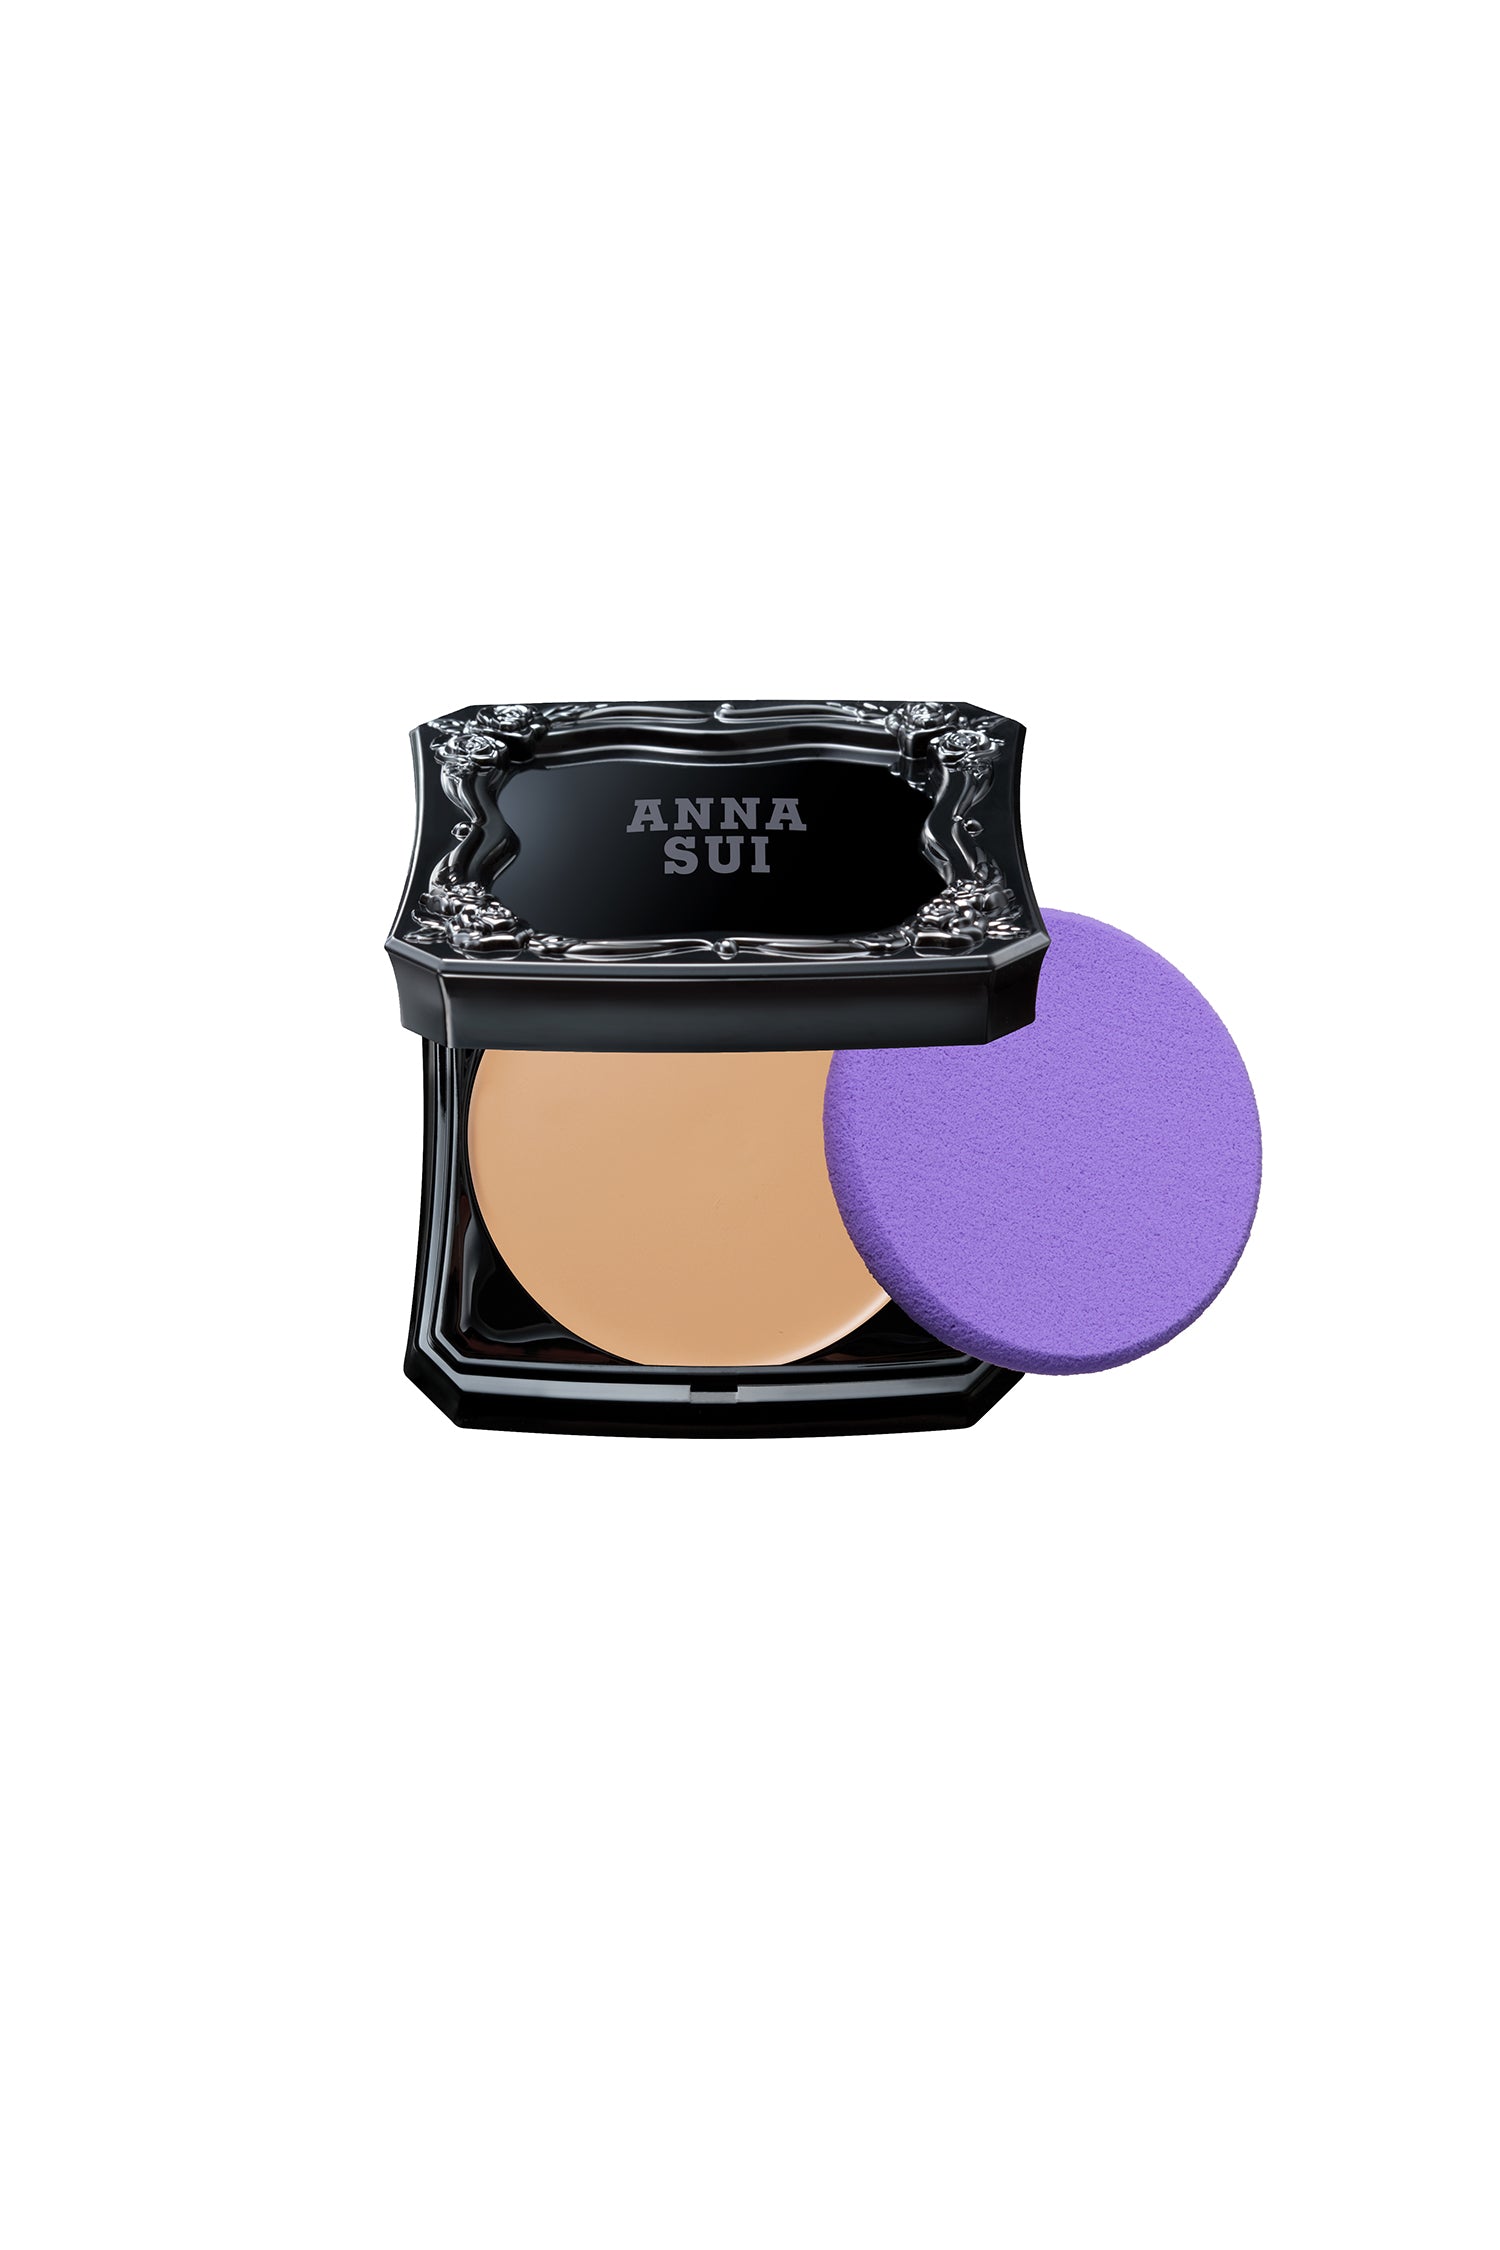 Anna Sui MEDIUM foundation in a black container, raised rose pattern and label, creates a flawless doll-like look